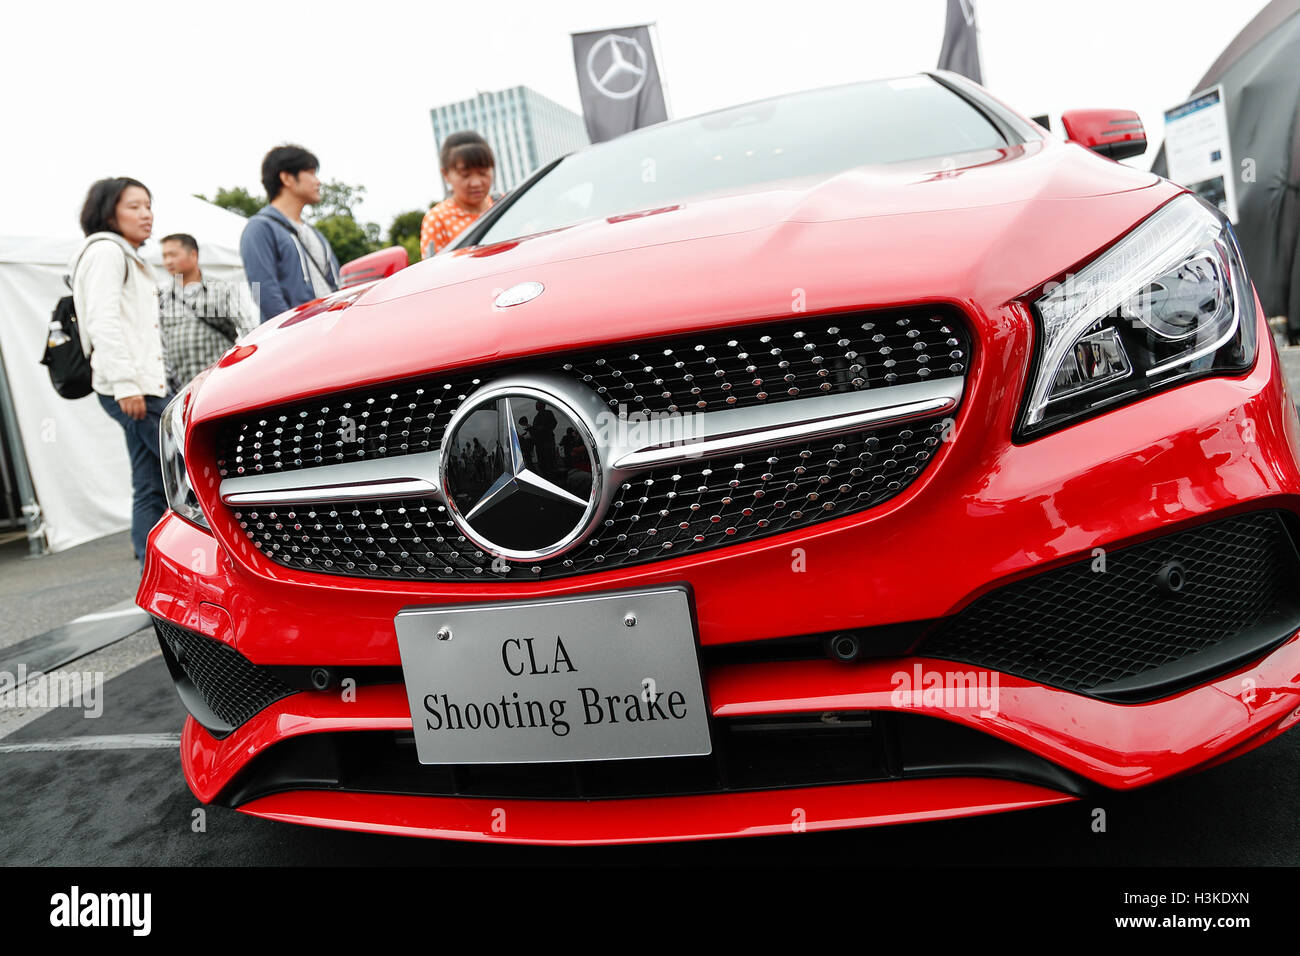 Visitors look at a Mercedes-Benz CLA 180 Shooting Brake Sports on display during the Tokyo Motor Fes 2016 at Odaiba on October 10, 2016, Tokyo, Japan. The annual festival provides an opportunity for visitors of all ages to interact with motor vehicles from Japanese and overseas auto manufacturers. This year organizers set up a 360 degrees VR (Virtual Reality) Dome where visitors can experience the thrills of riding through virtual reality. The exhibition runs from October 8 to 10. Credit:  Rodrigo Reyes Marin/AFLO/Alamy Live News Stock Photo